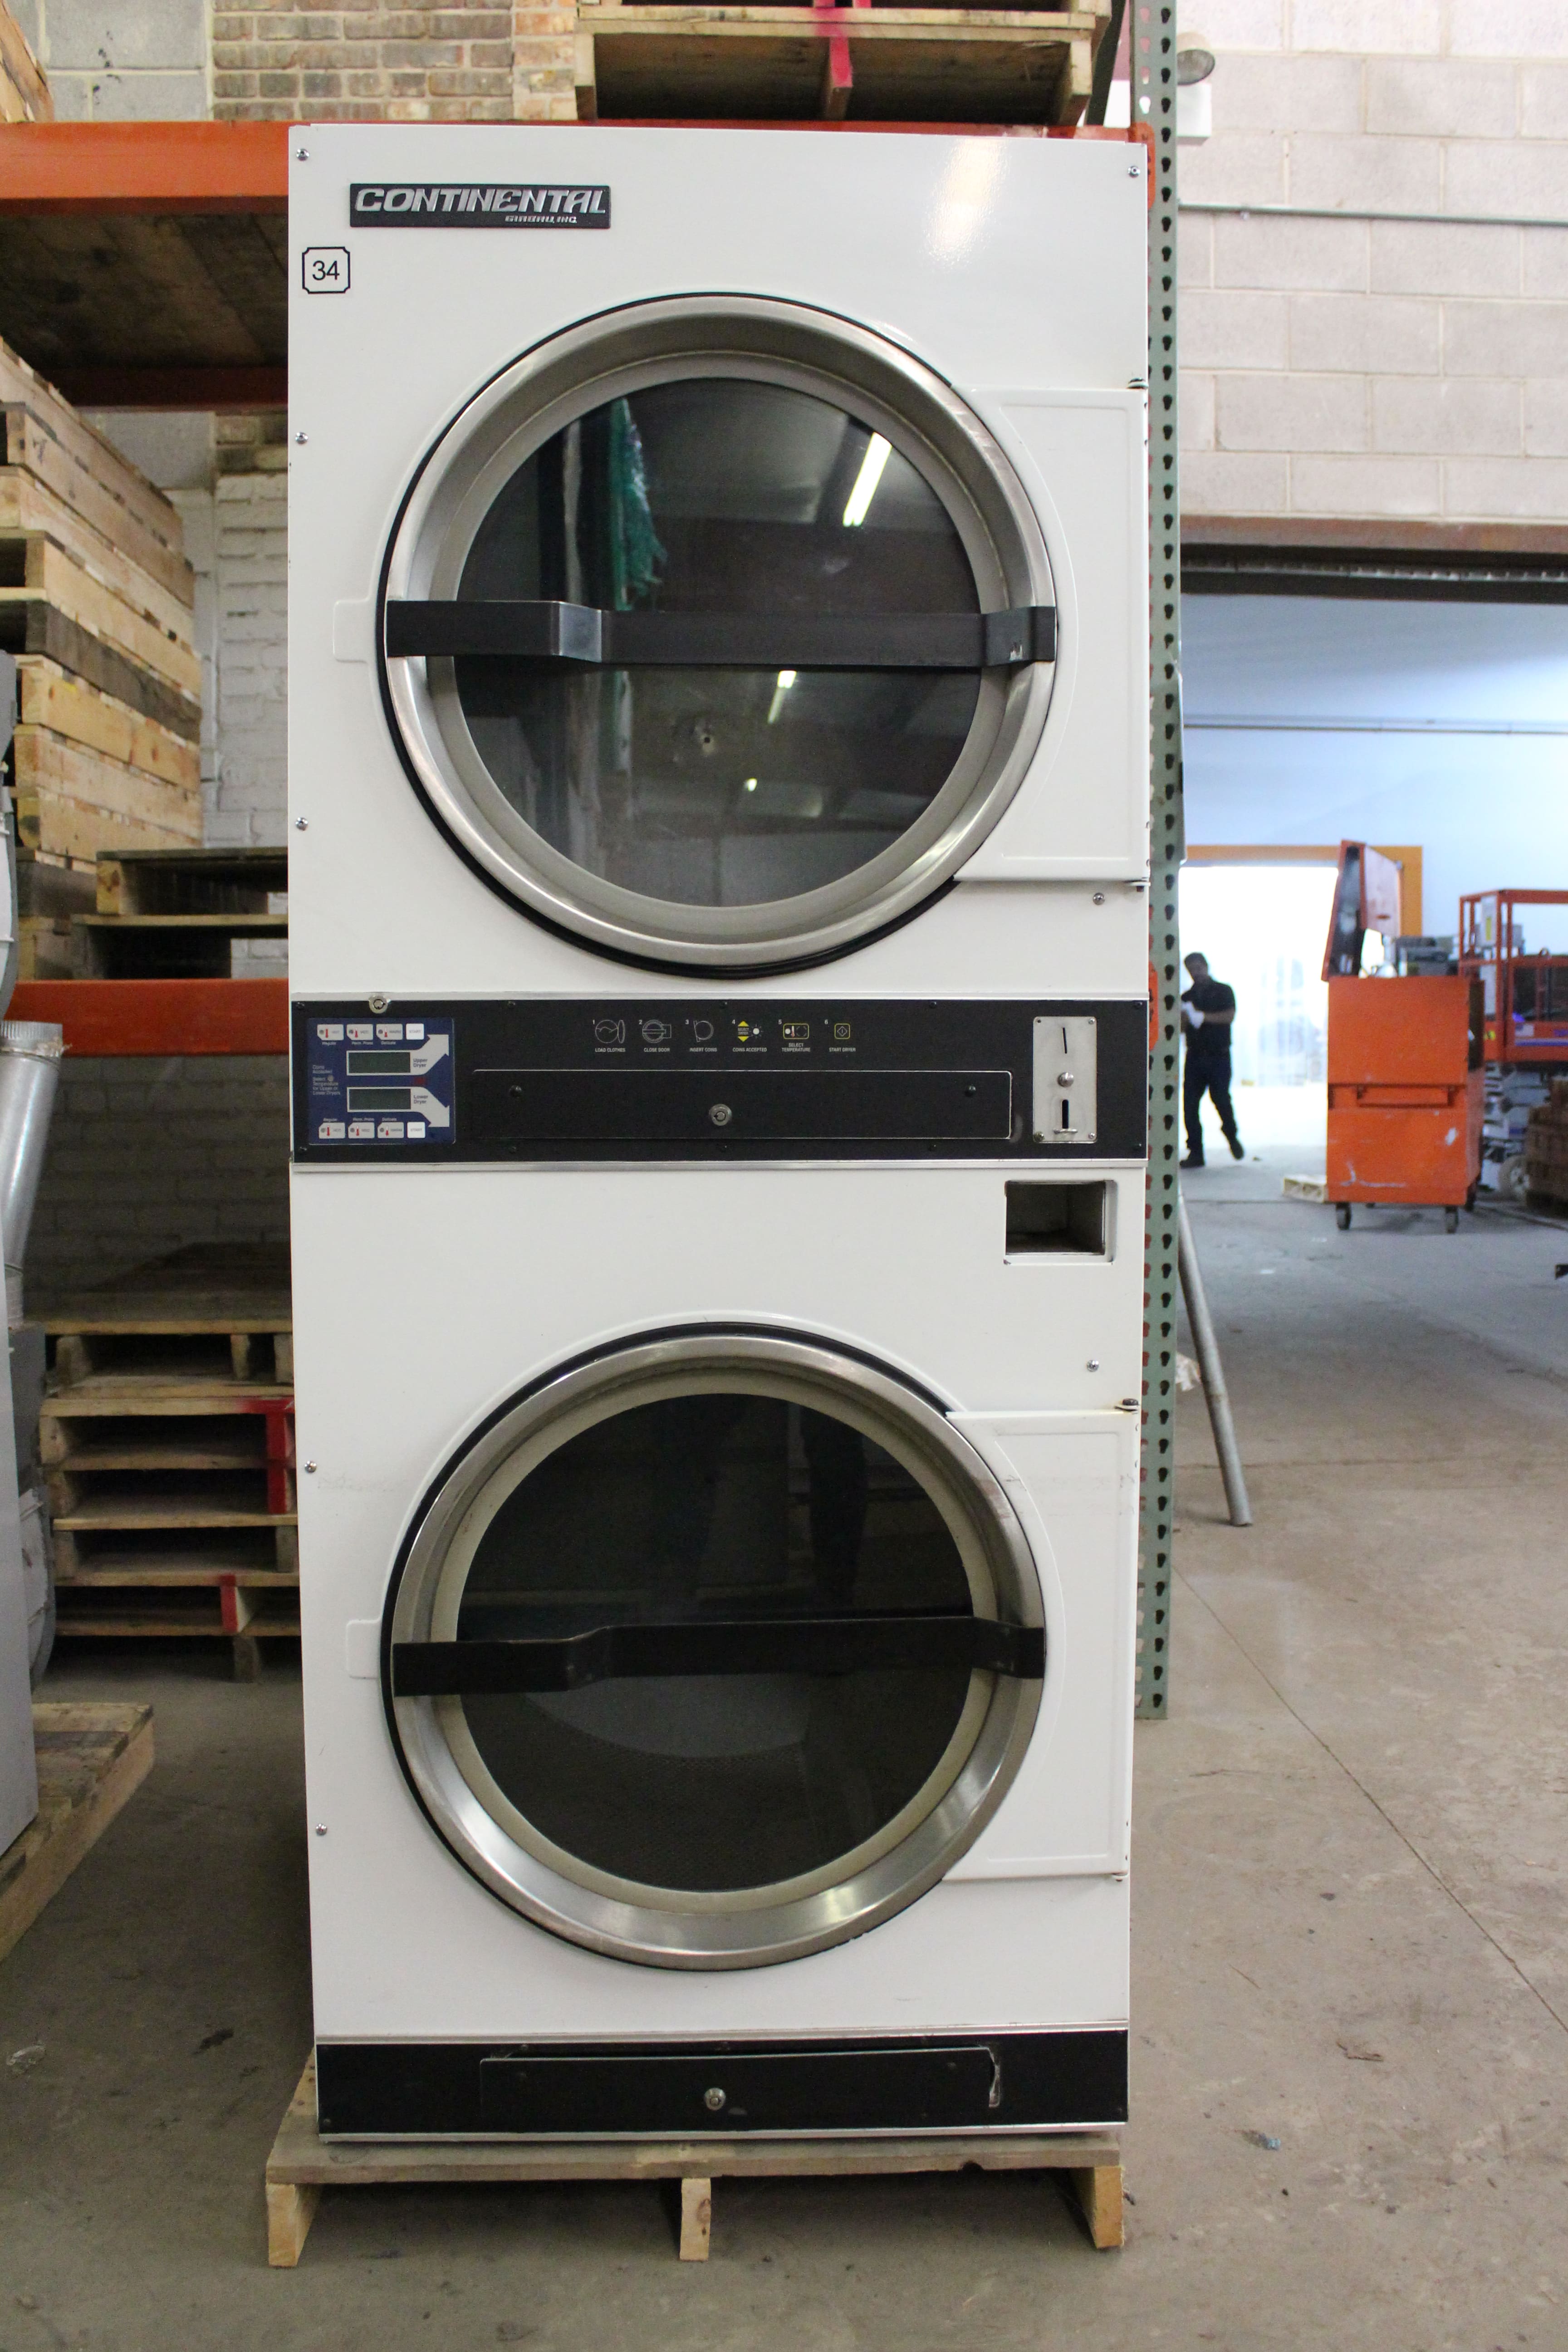 Are All Front Load Washers & Dryers Stackable? - American Freight Blog